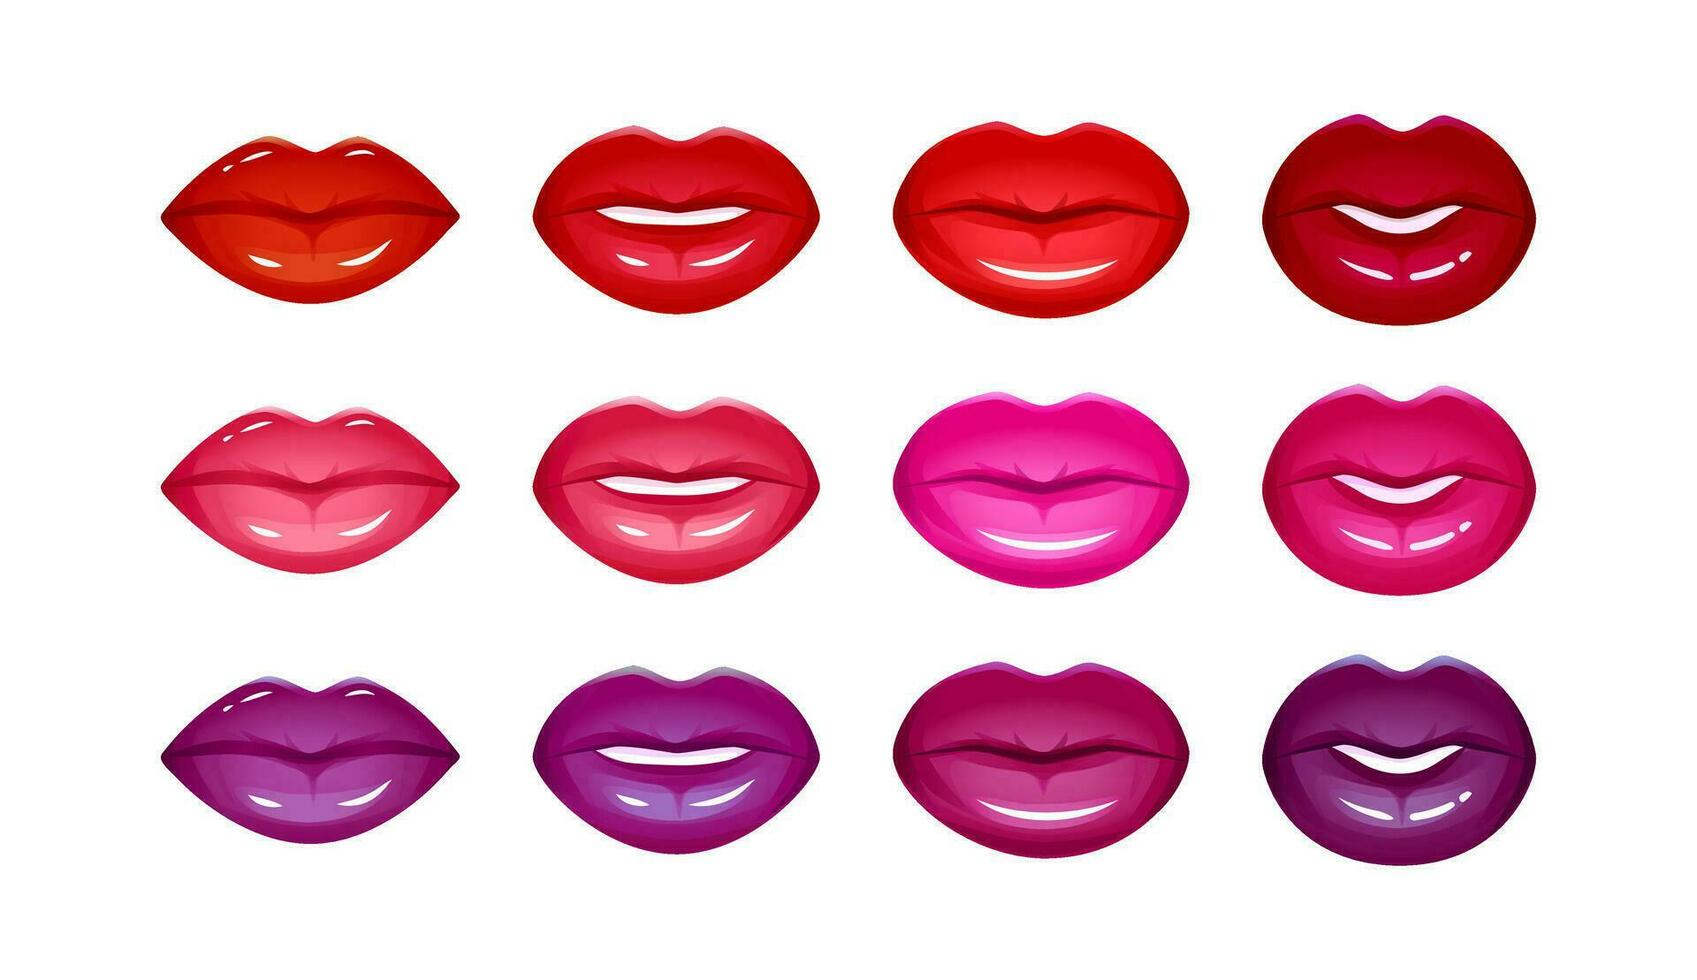 Realistic lips vector set isolated on white. Women 3d mouth, red, pink and purple shiny glossy lipstick. Fashion glamour illustration.